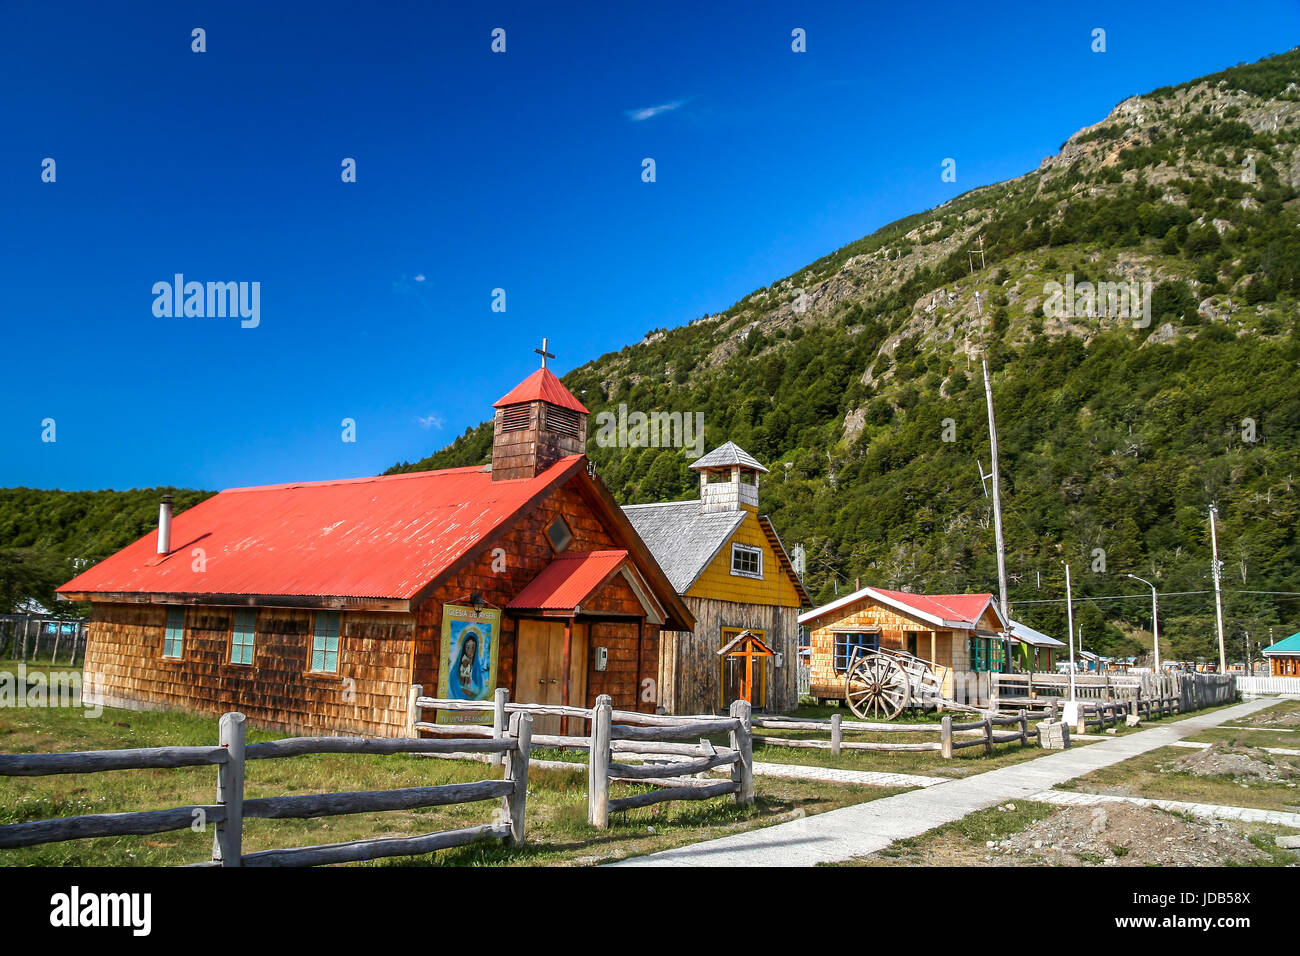 Old small wooden church in Villa O Higgins, small Chilean town at the end of Carretera Austral in Patagonia, Chile Stock Photo